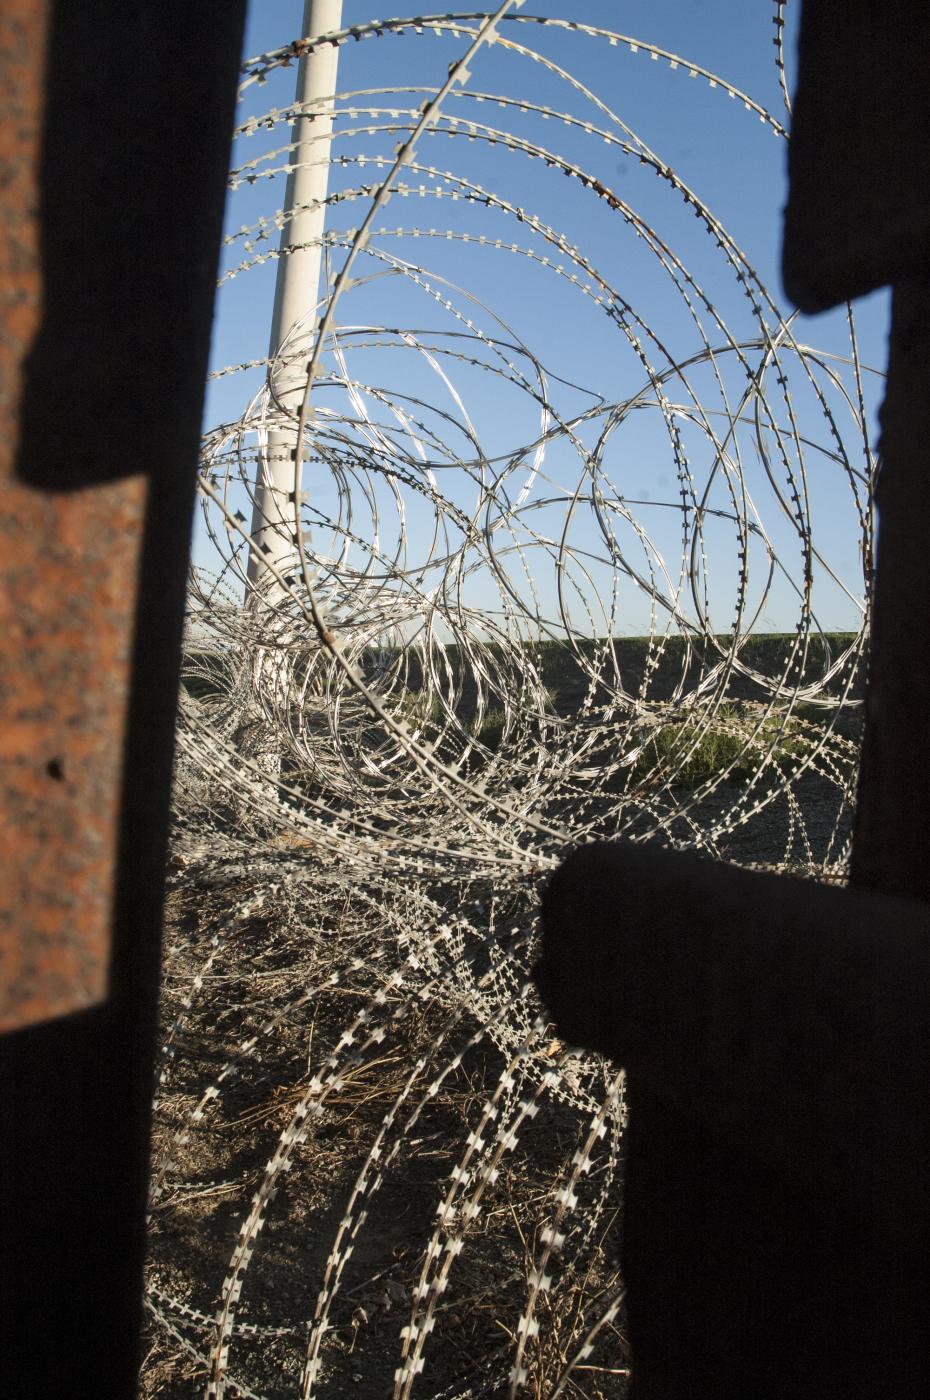 Razor wire entry into the U.S. | Buy this image